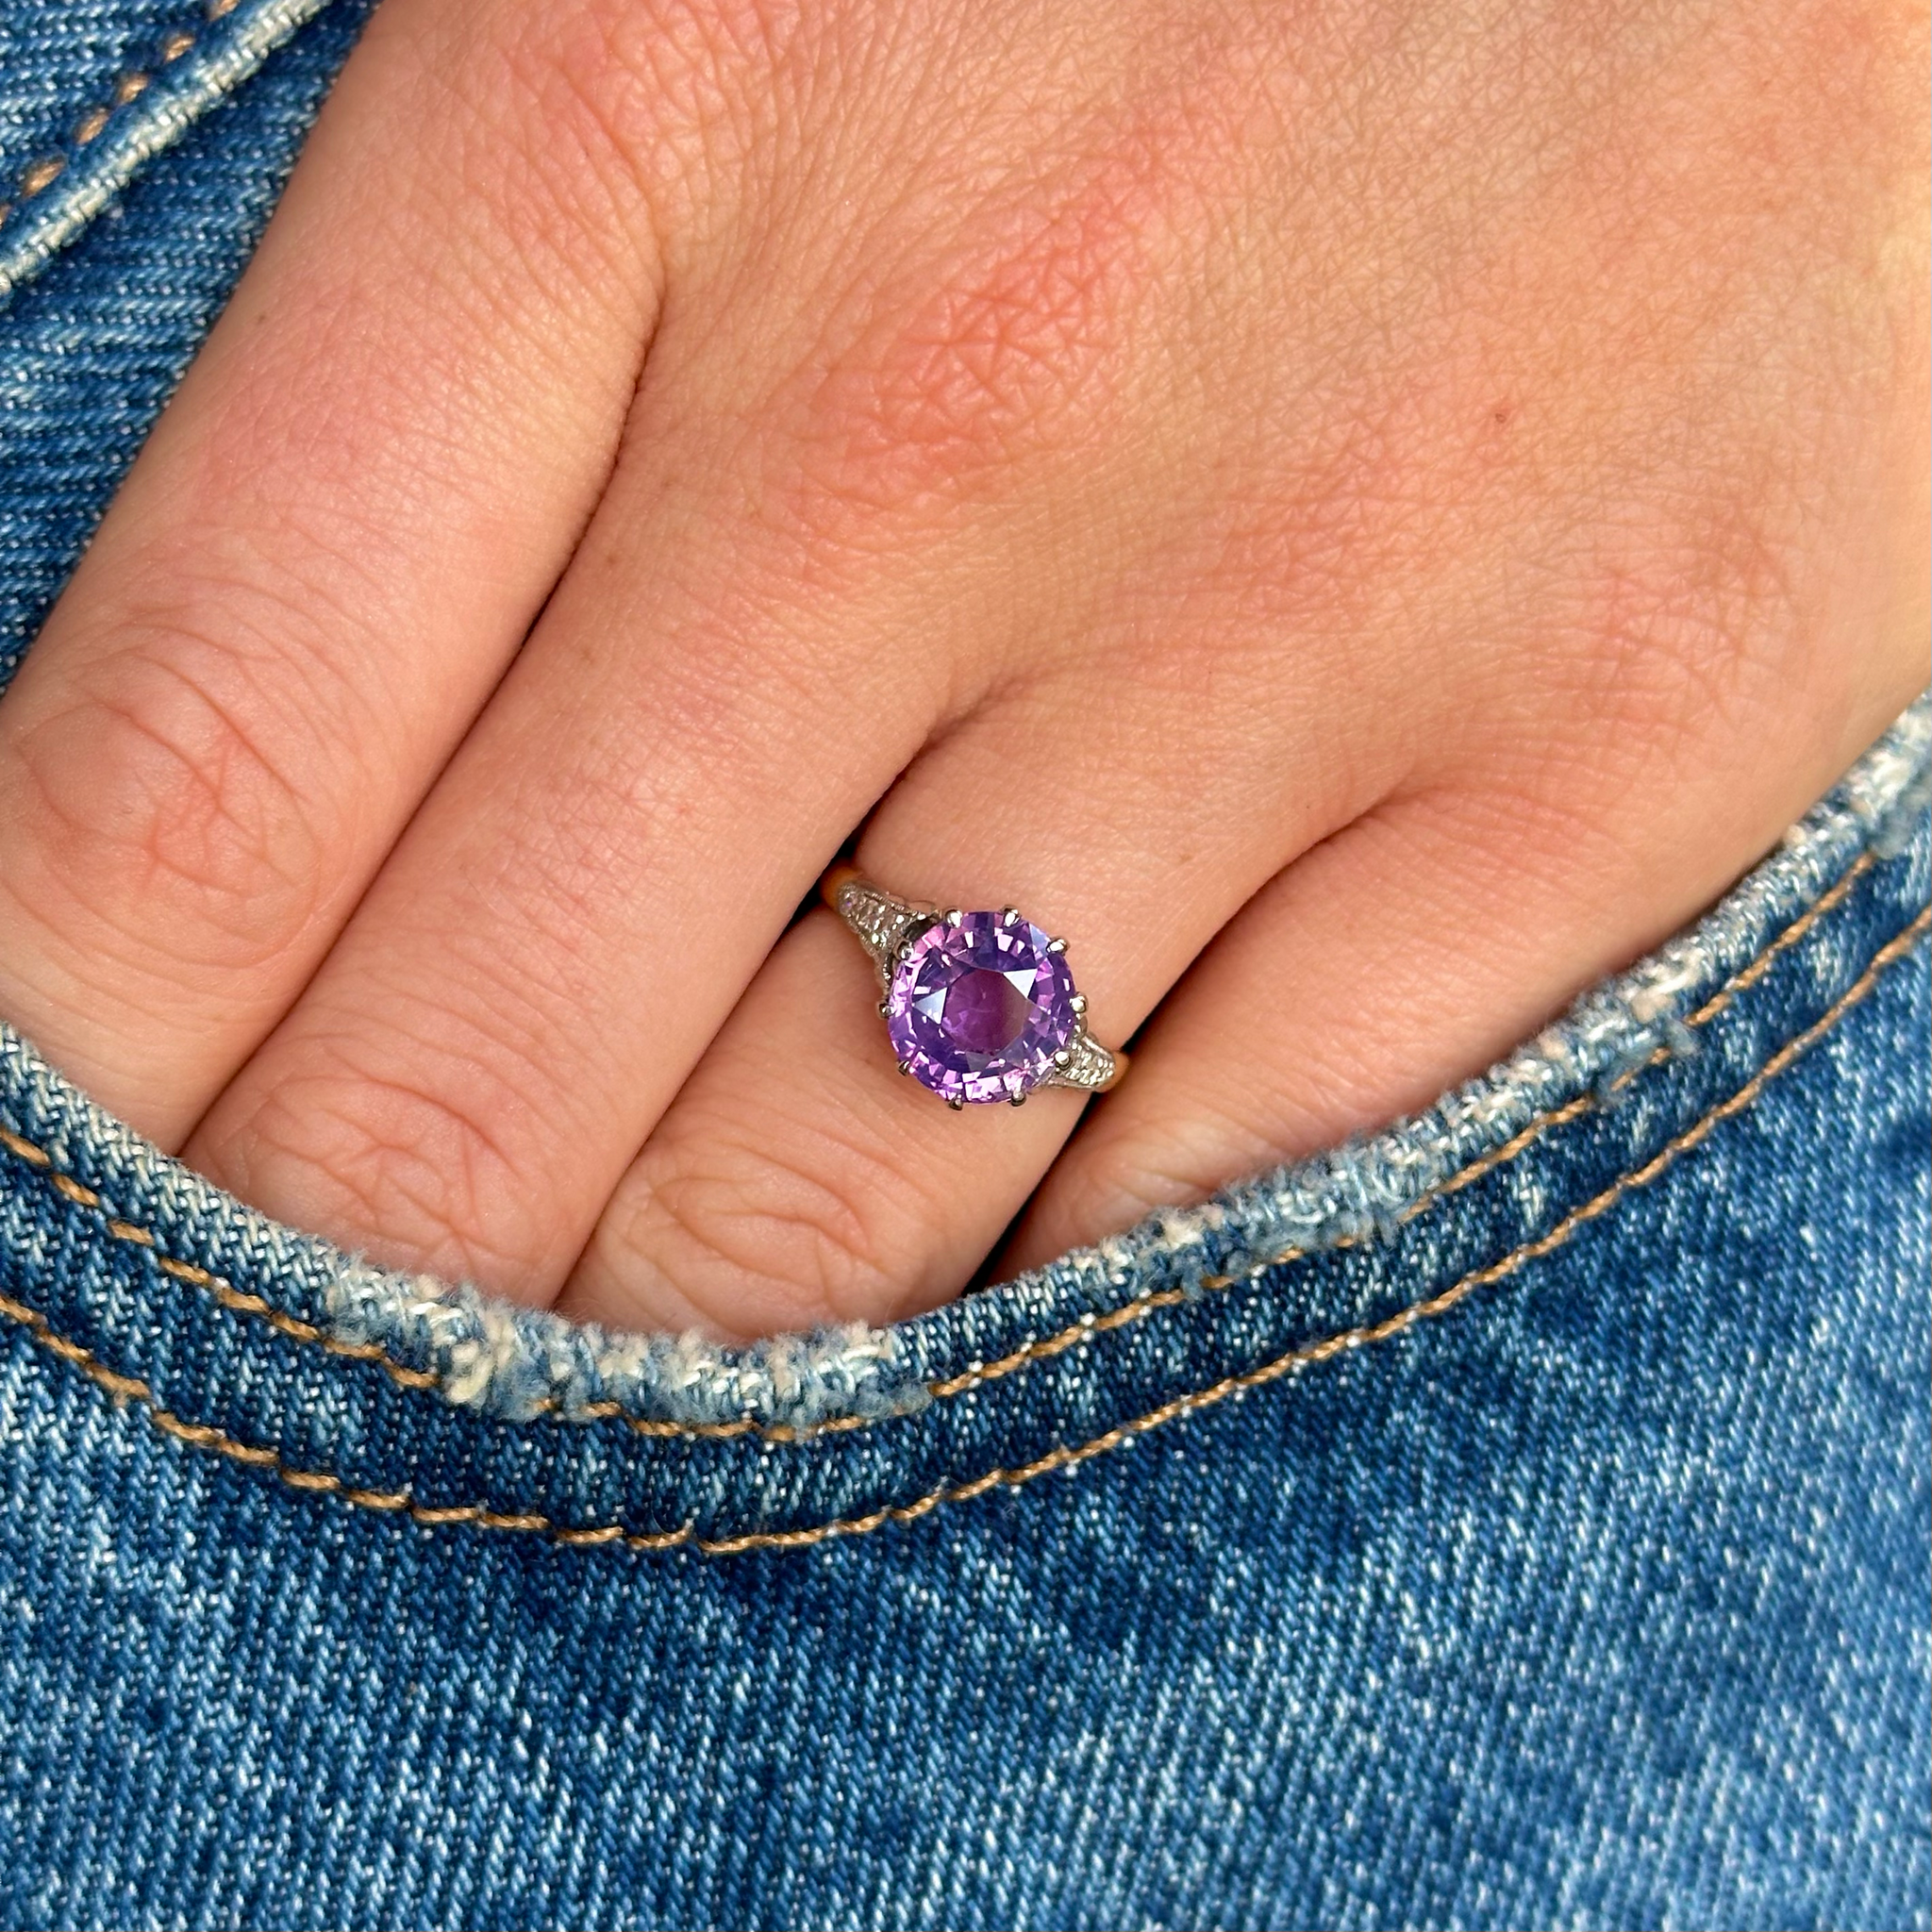 edwadian amethyst ring worn on hand in pocket of jeans